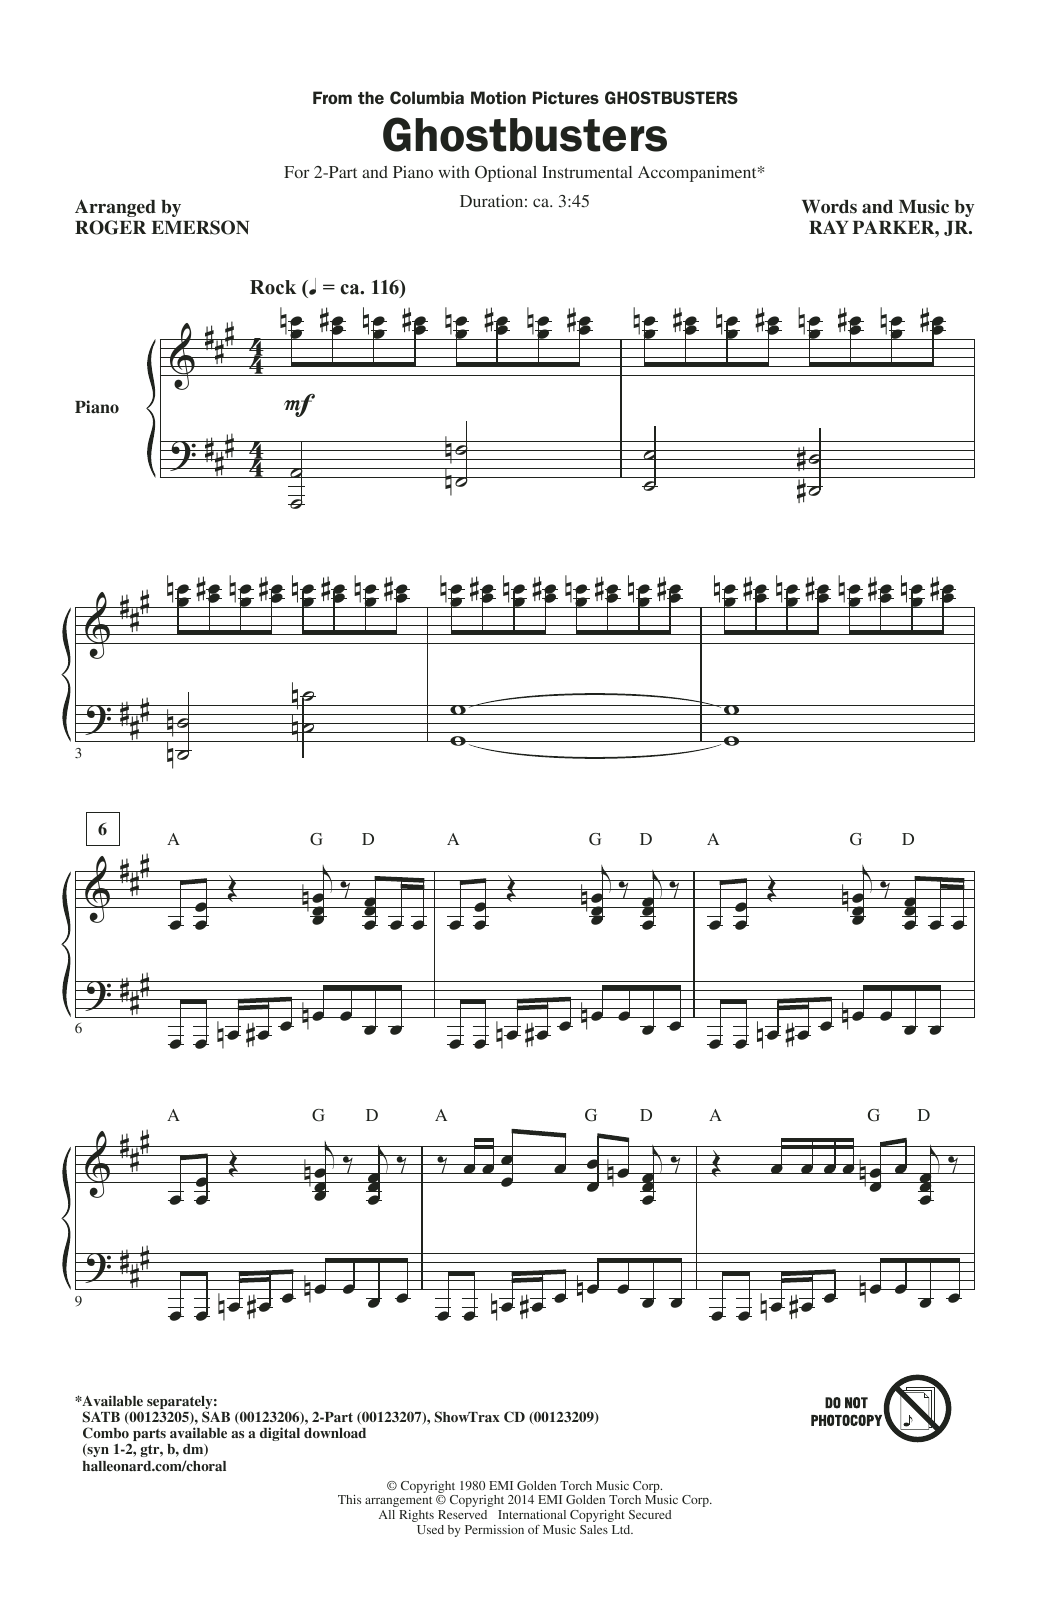 Download Ray Parker Jr. Ghostbusters (arr. Roger Emerson) Sheet Music